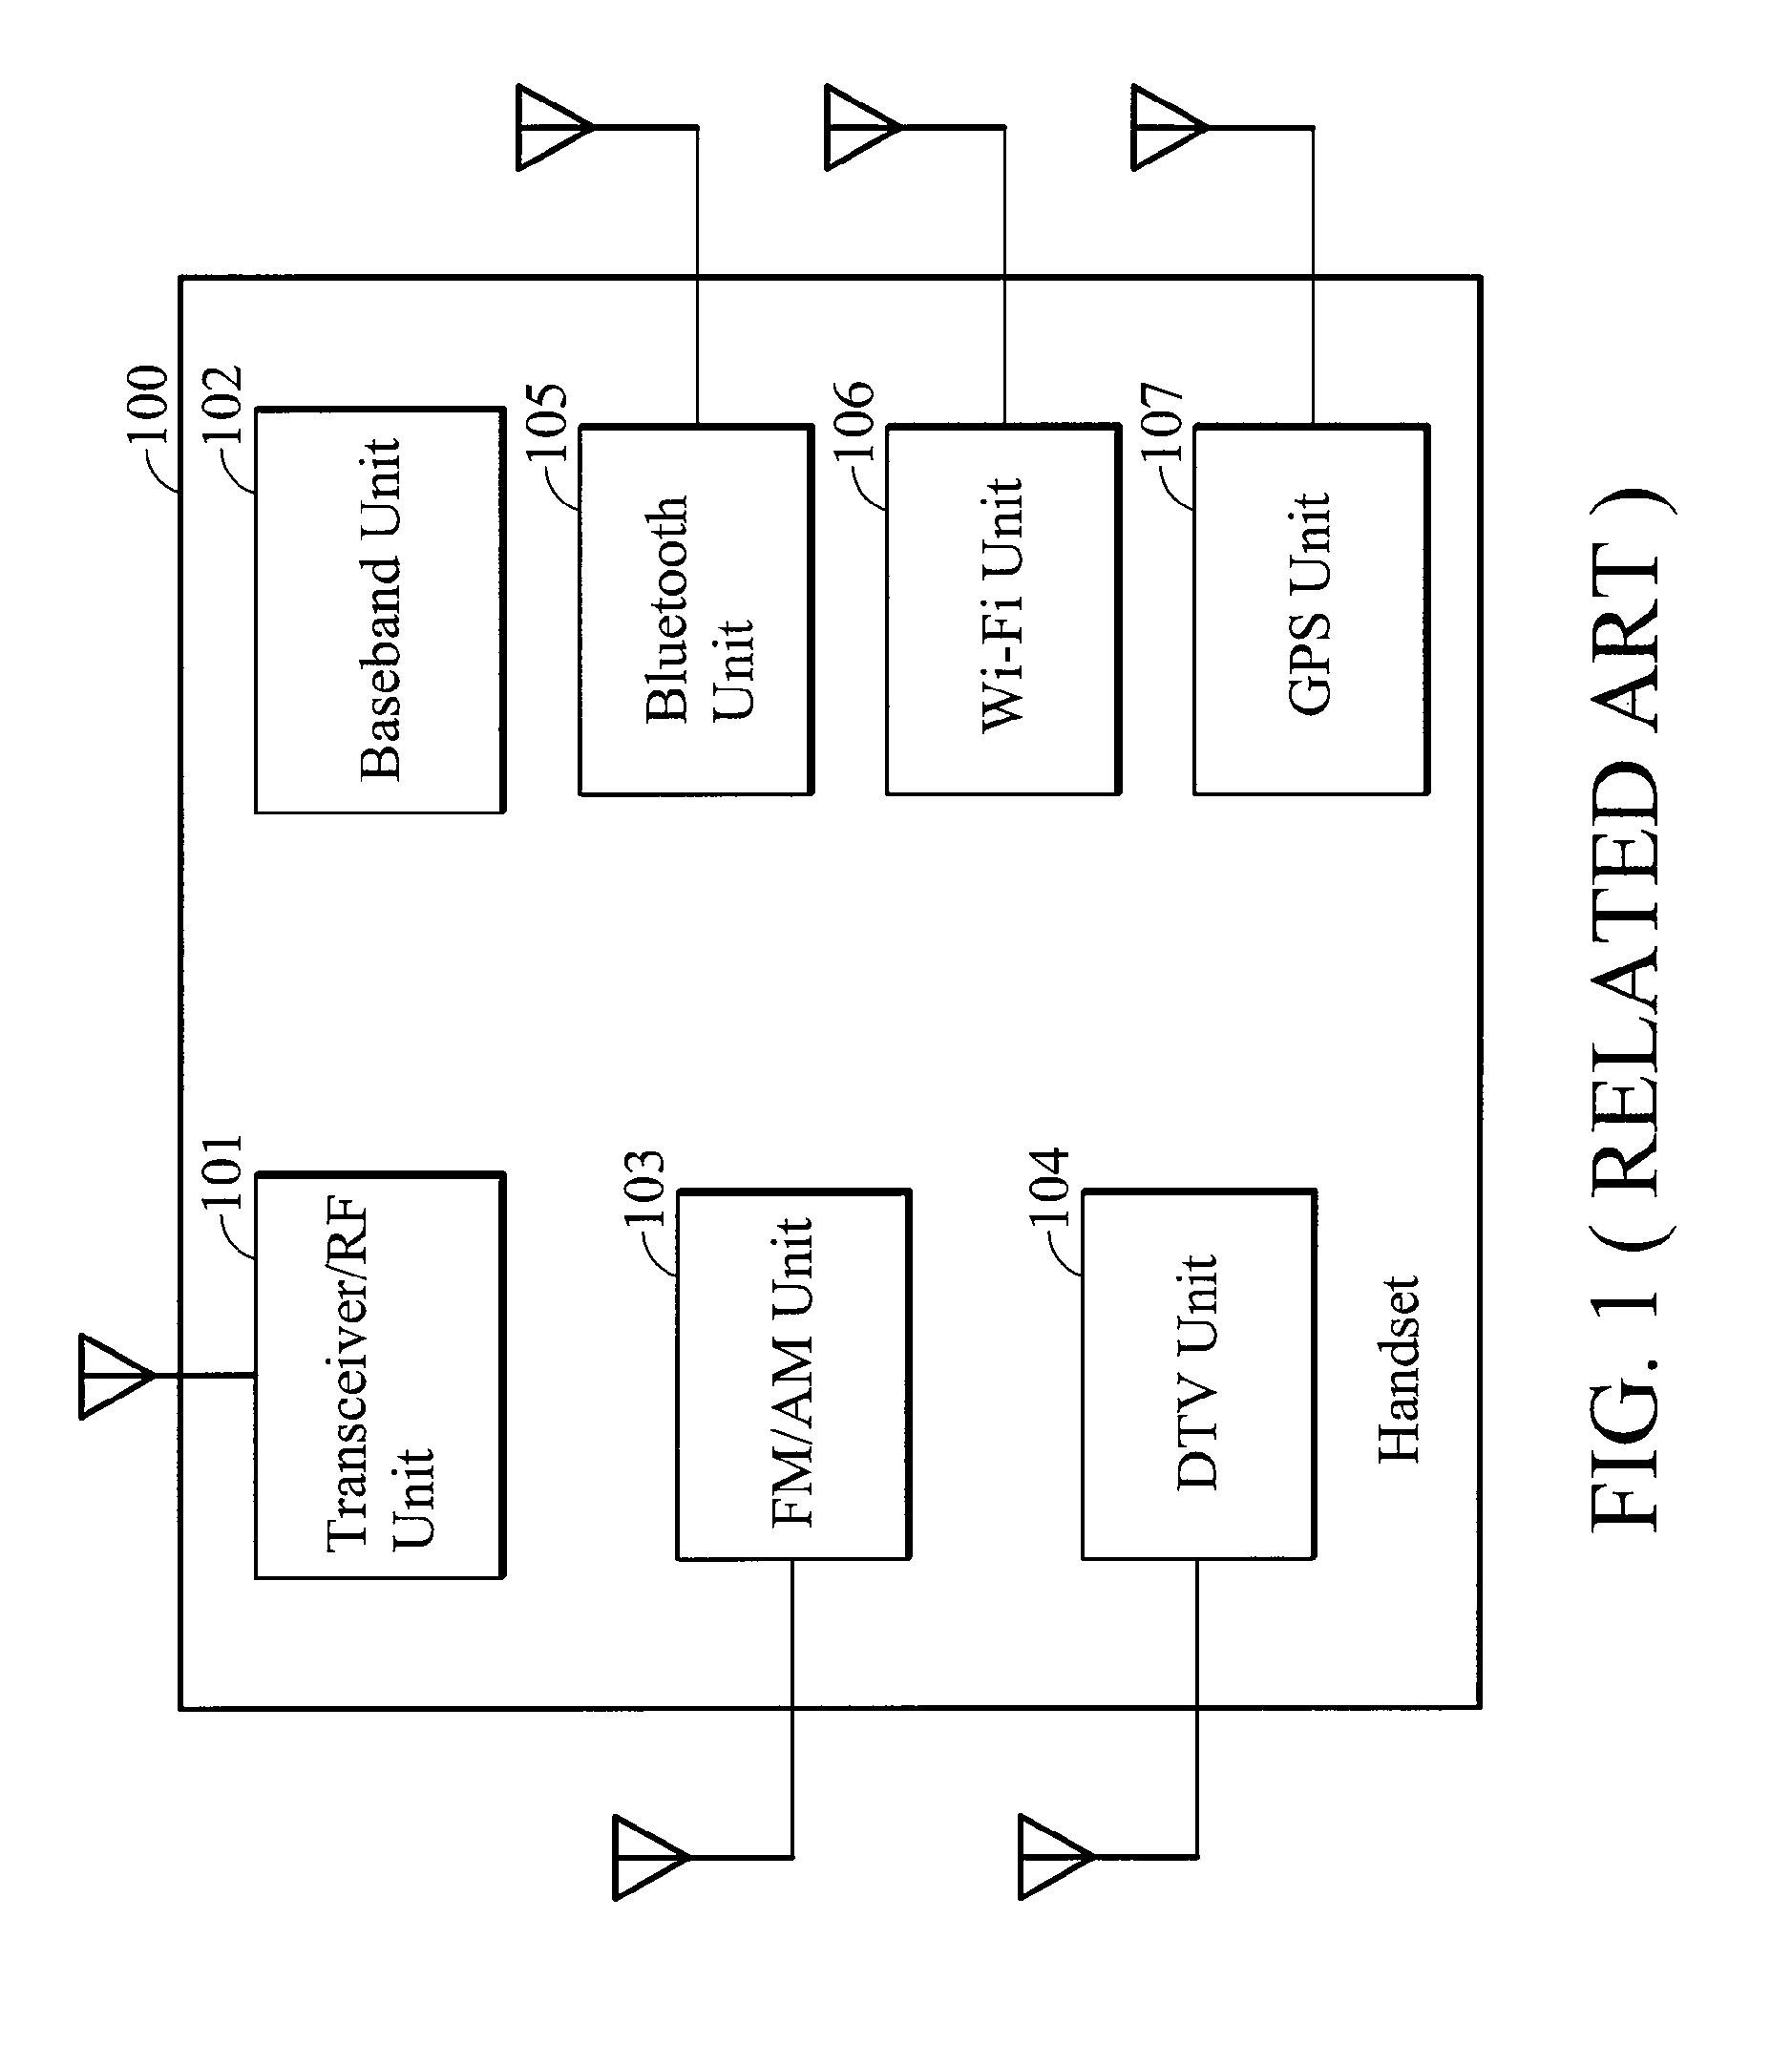 Mobile communication devices with internal antennas